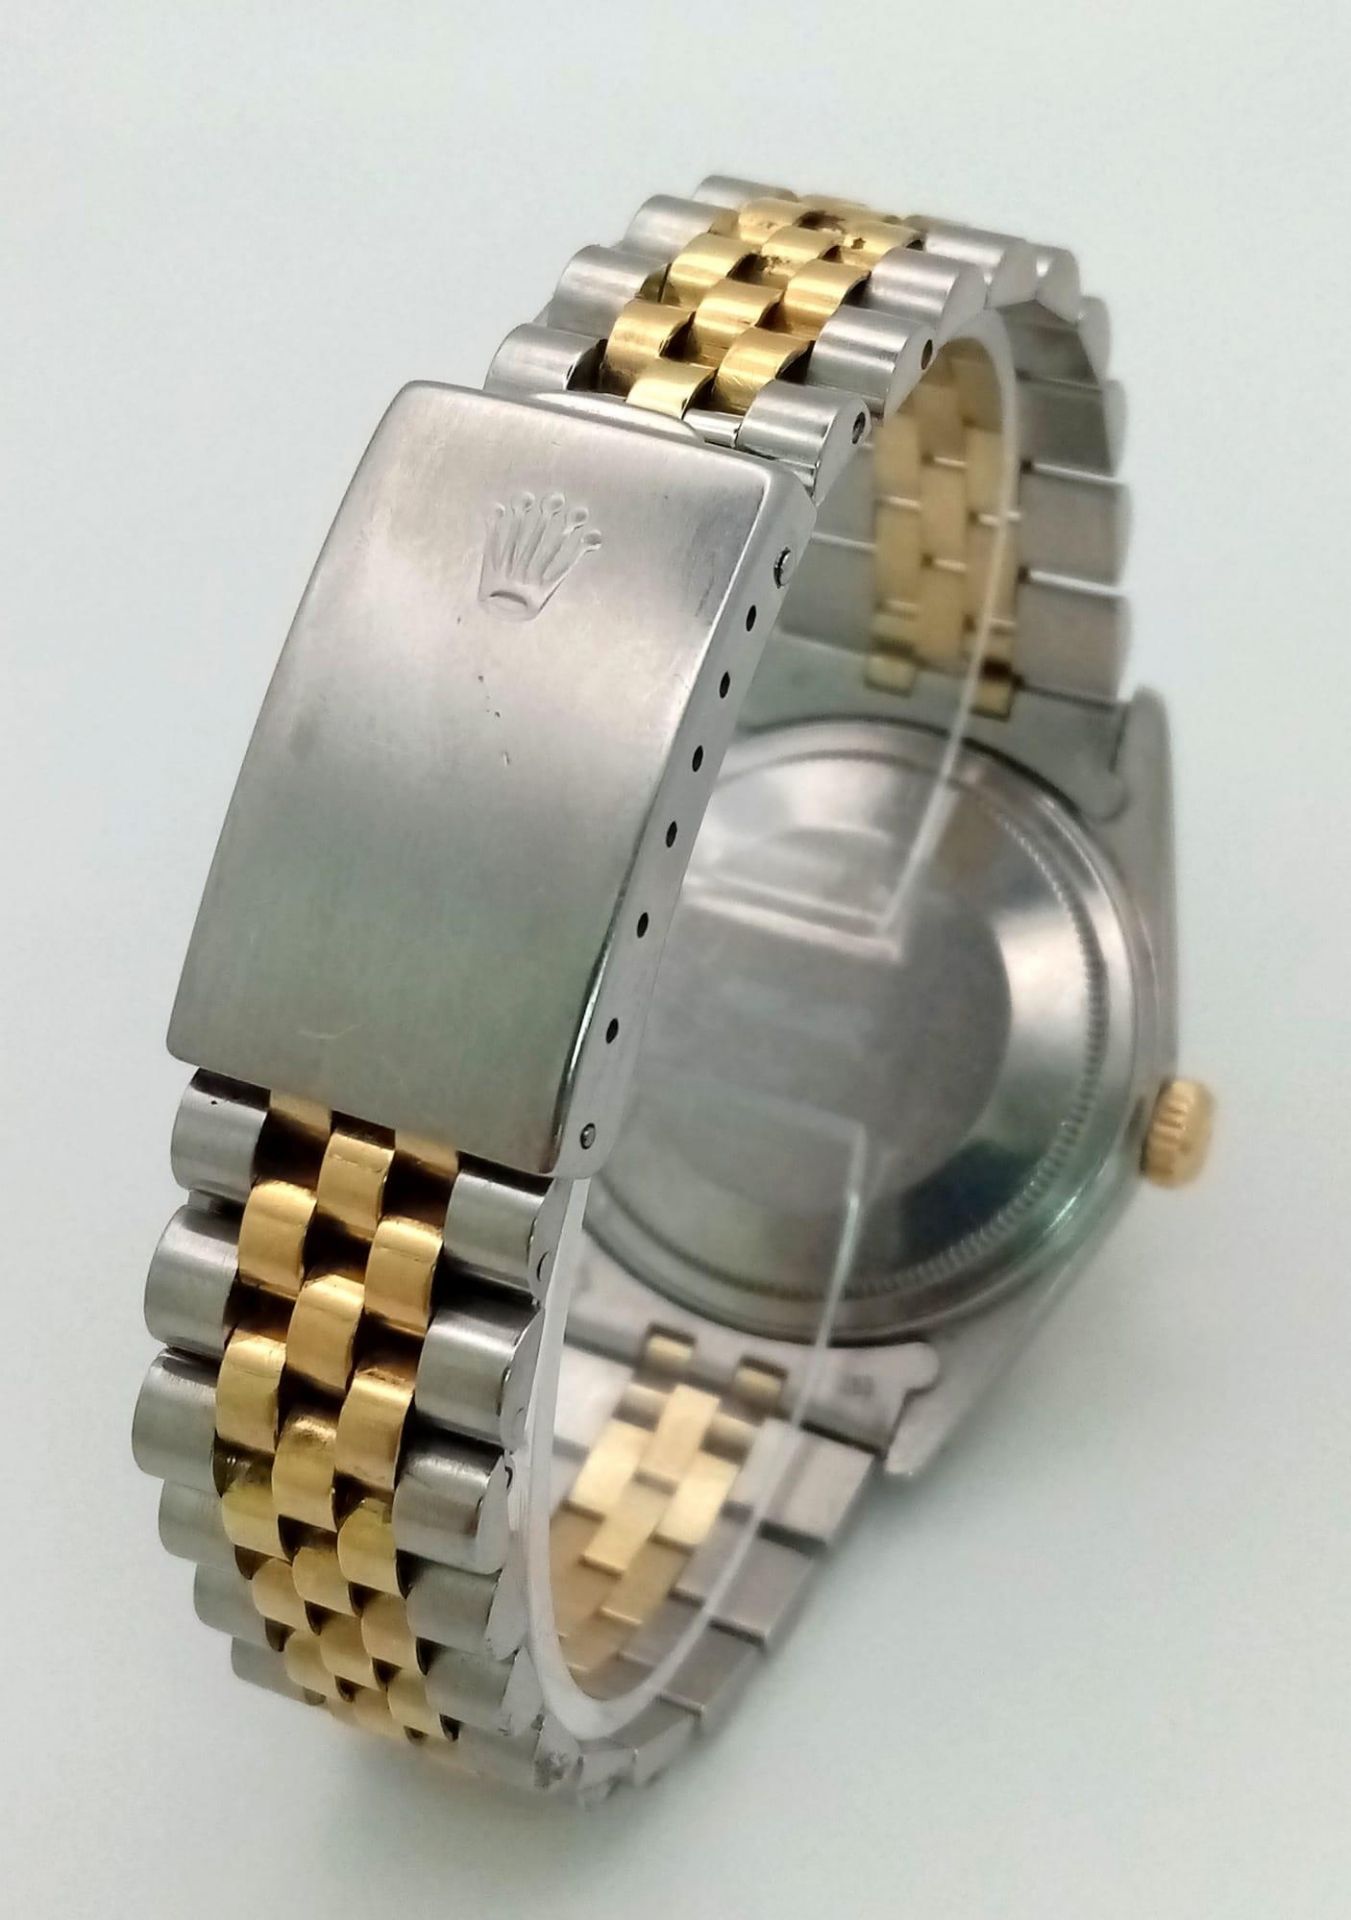 A ROLEX OYSTER PERPETUAL DATEJUST IN BI-METAL WITH GOLDTONE DIAL IN ORIGINAL BOX . 36mm - Image 5 of 10